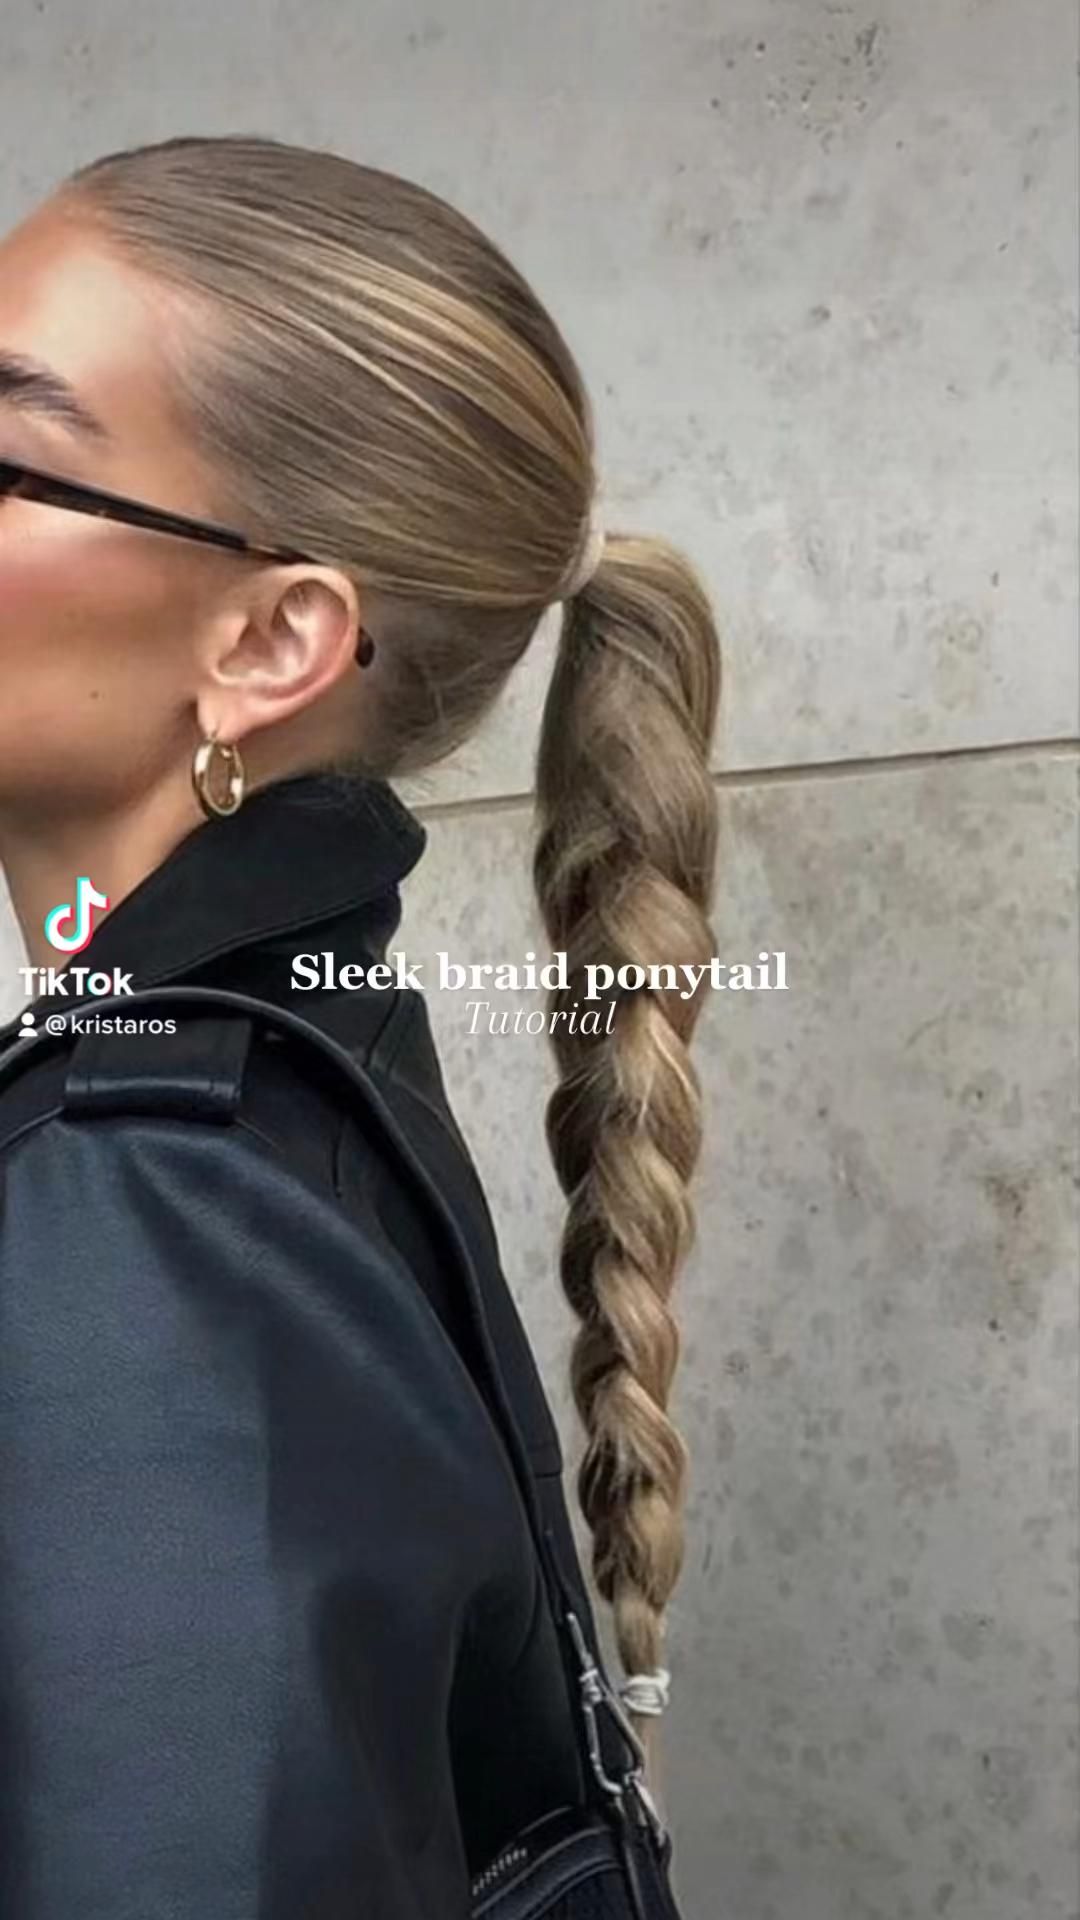 Pony tail hairstyle